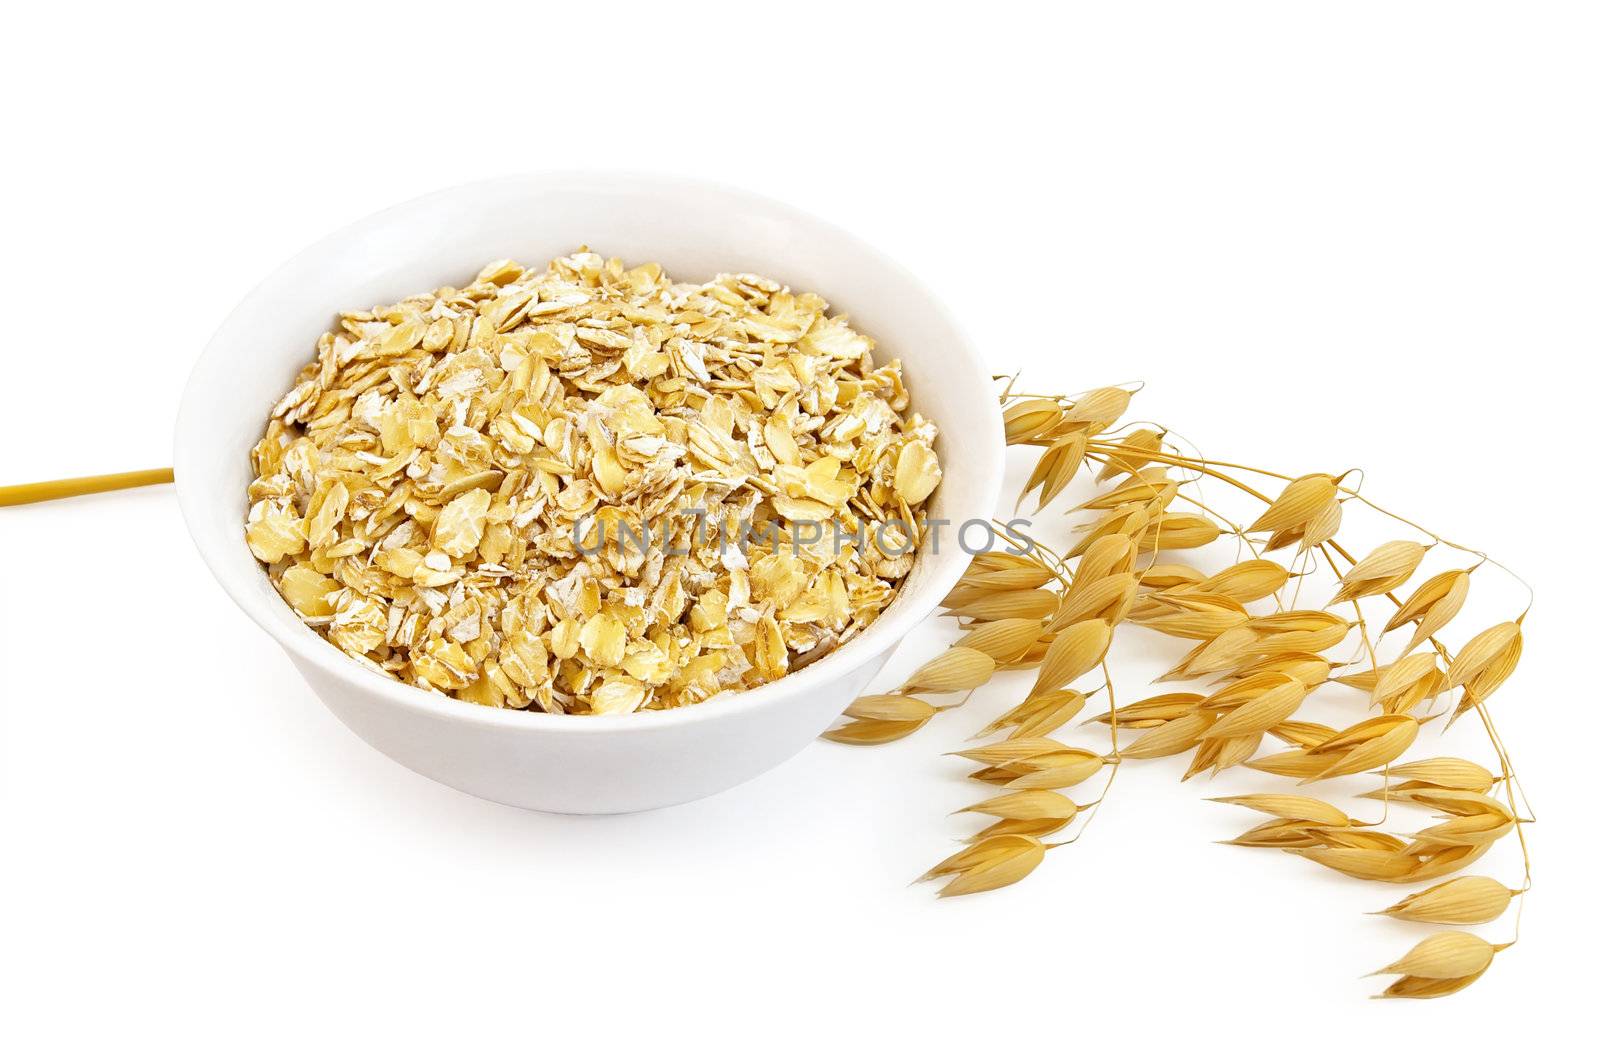 Rolled oats in a bowl, the stem of ripe oats is isolated on a white background